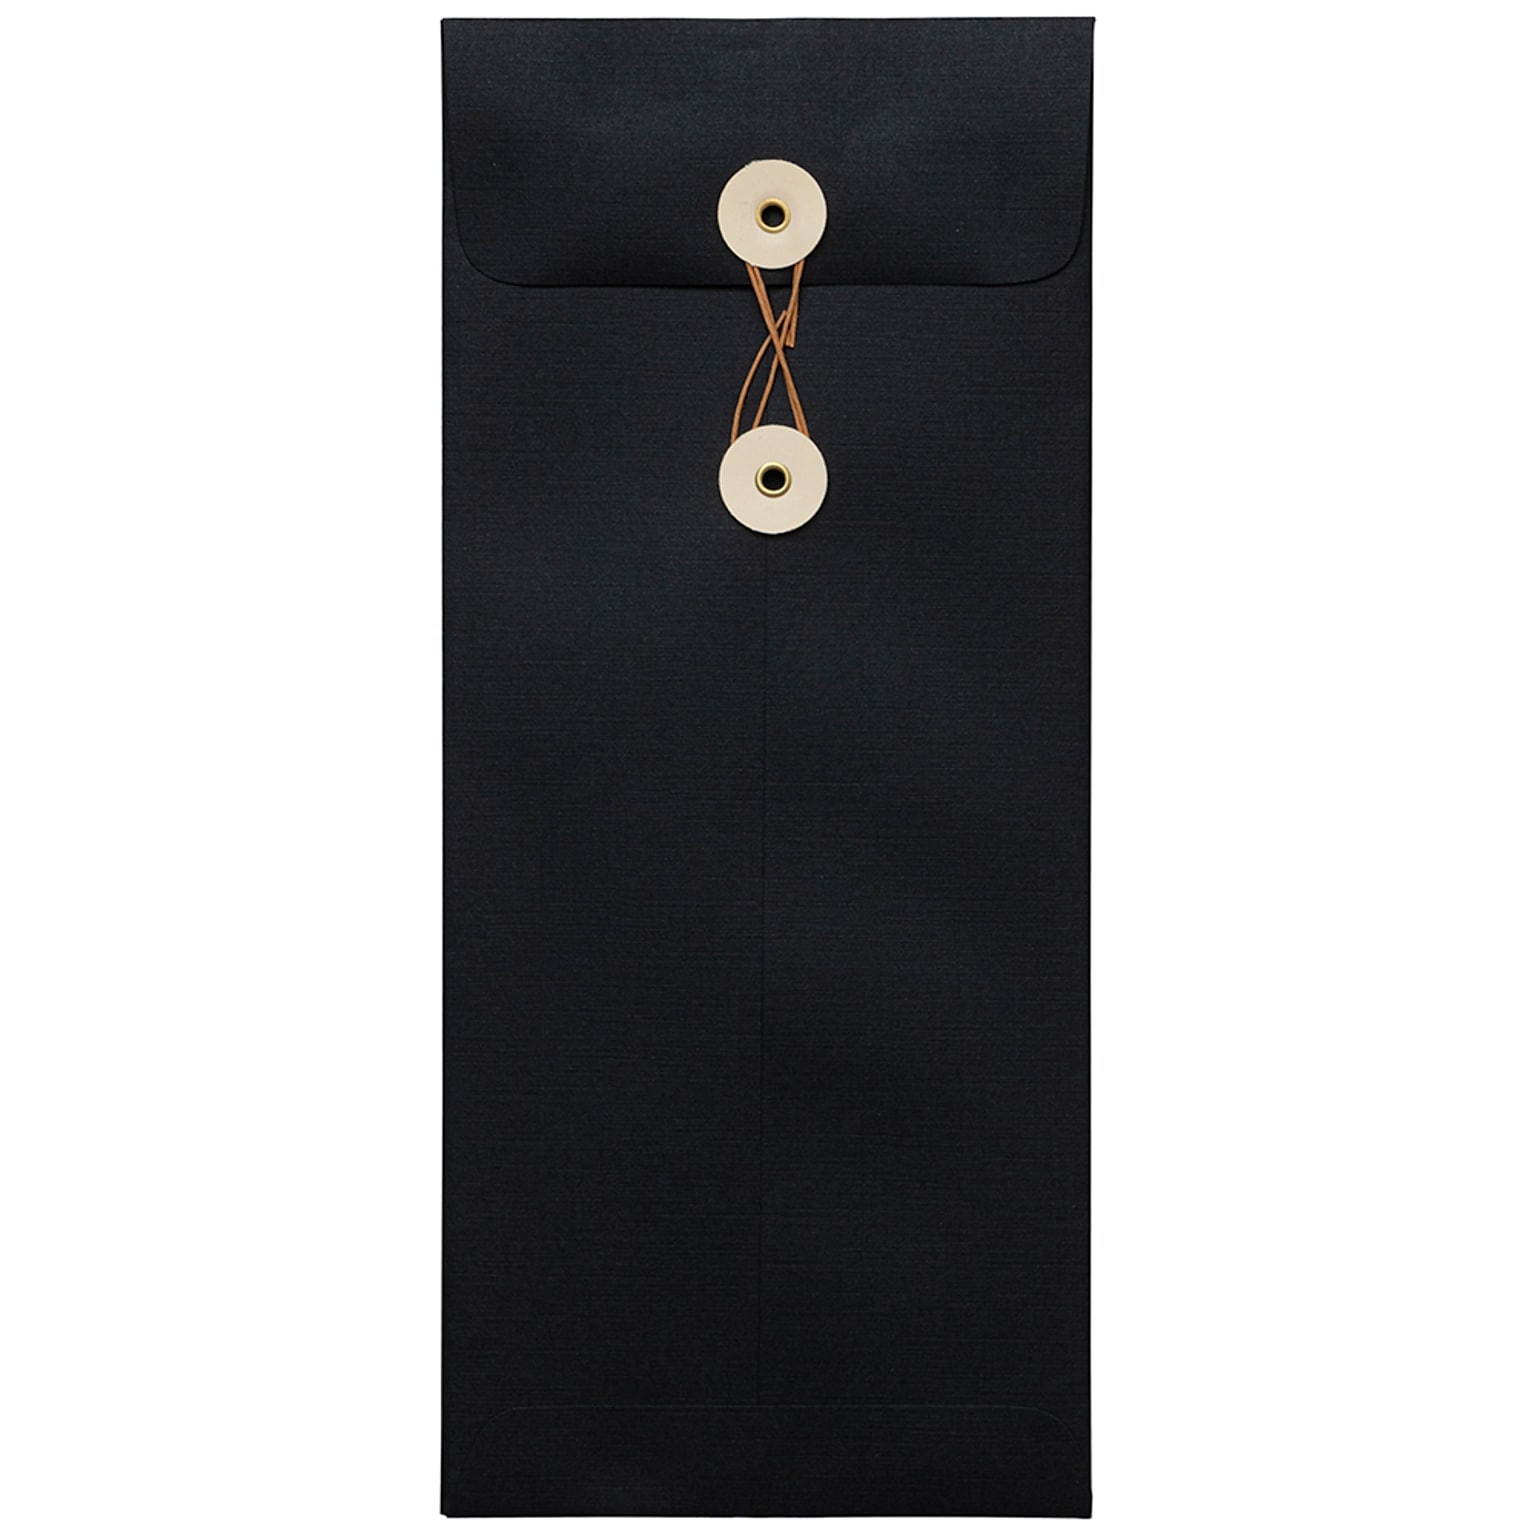 JAM Paper #10 Policy Business Envelopes with Button and String Closure, 4 1/8 x 9 1/2, Black Linen, 25/Pack (1261601)